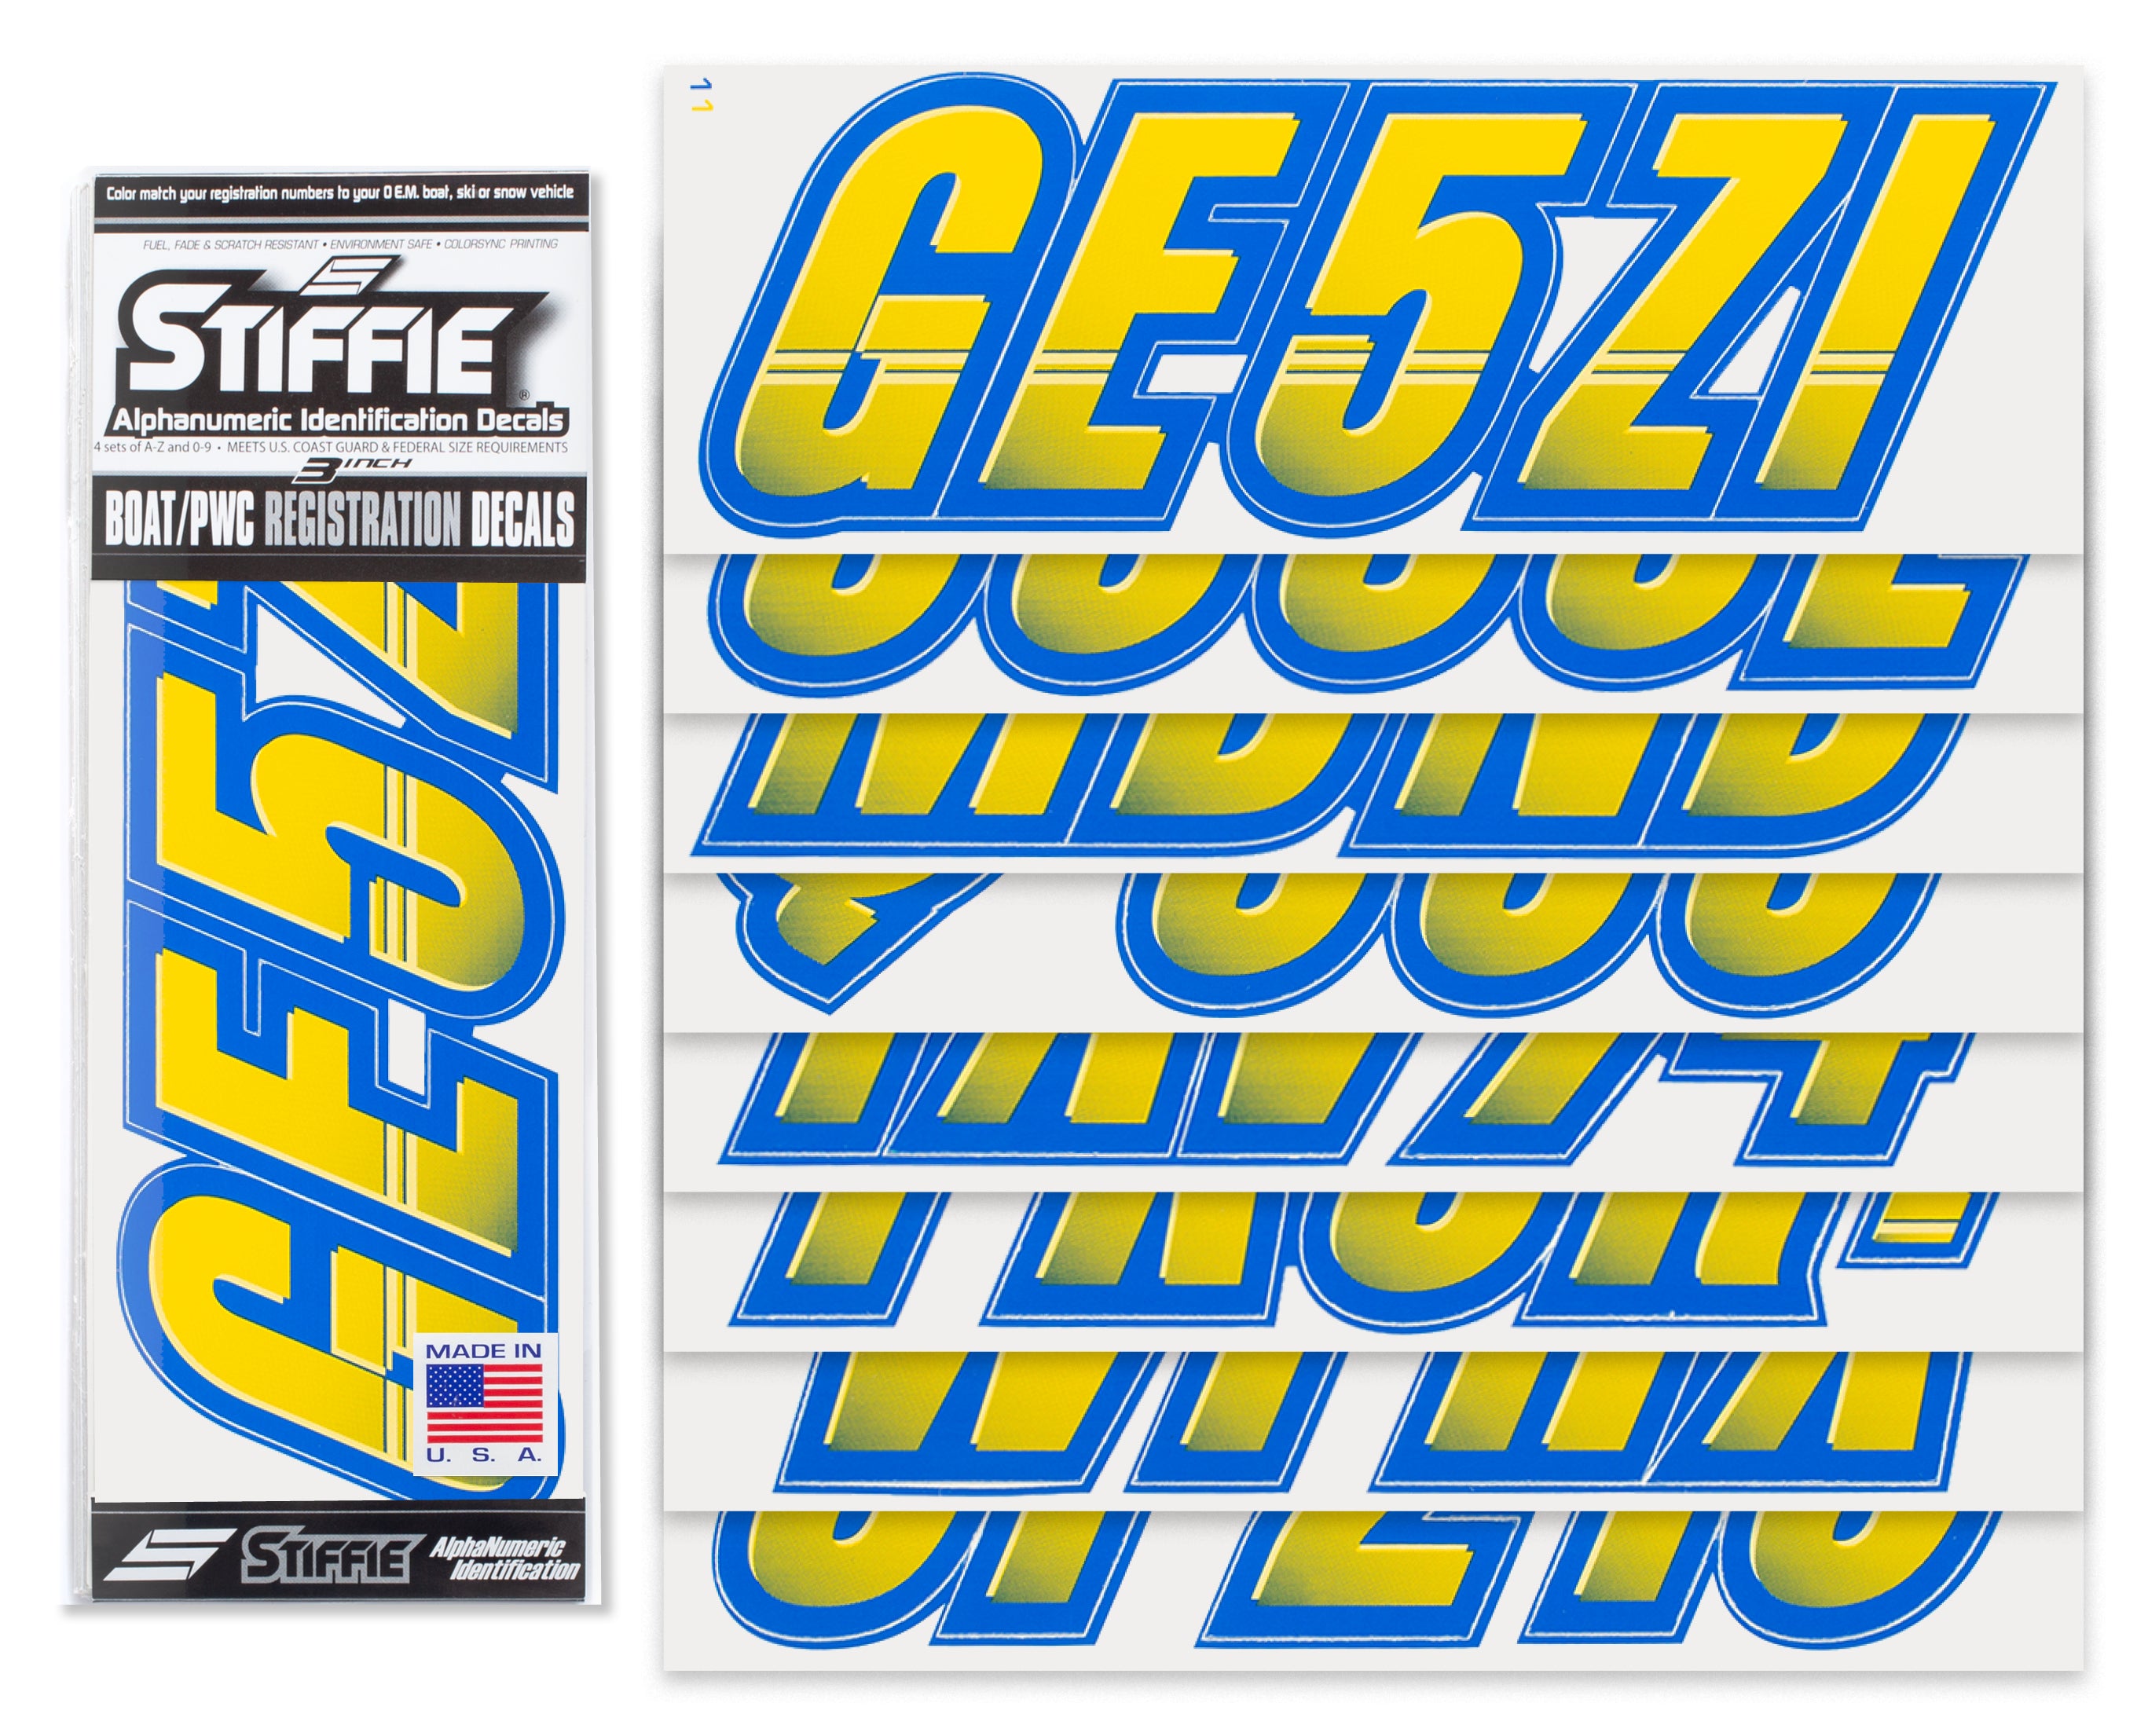 STIFFIE Techtron Yellow/Blue 3" Alpha-Numeric Registration Identification Numbers Stickers Decals for Boats & Personal Watercraft